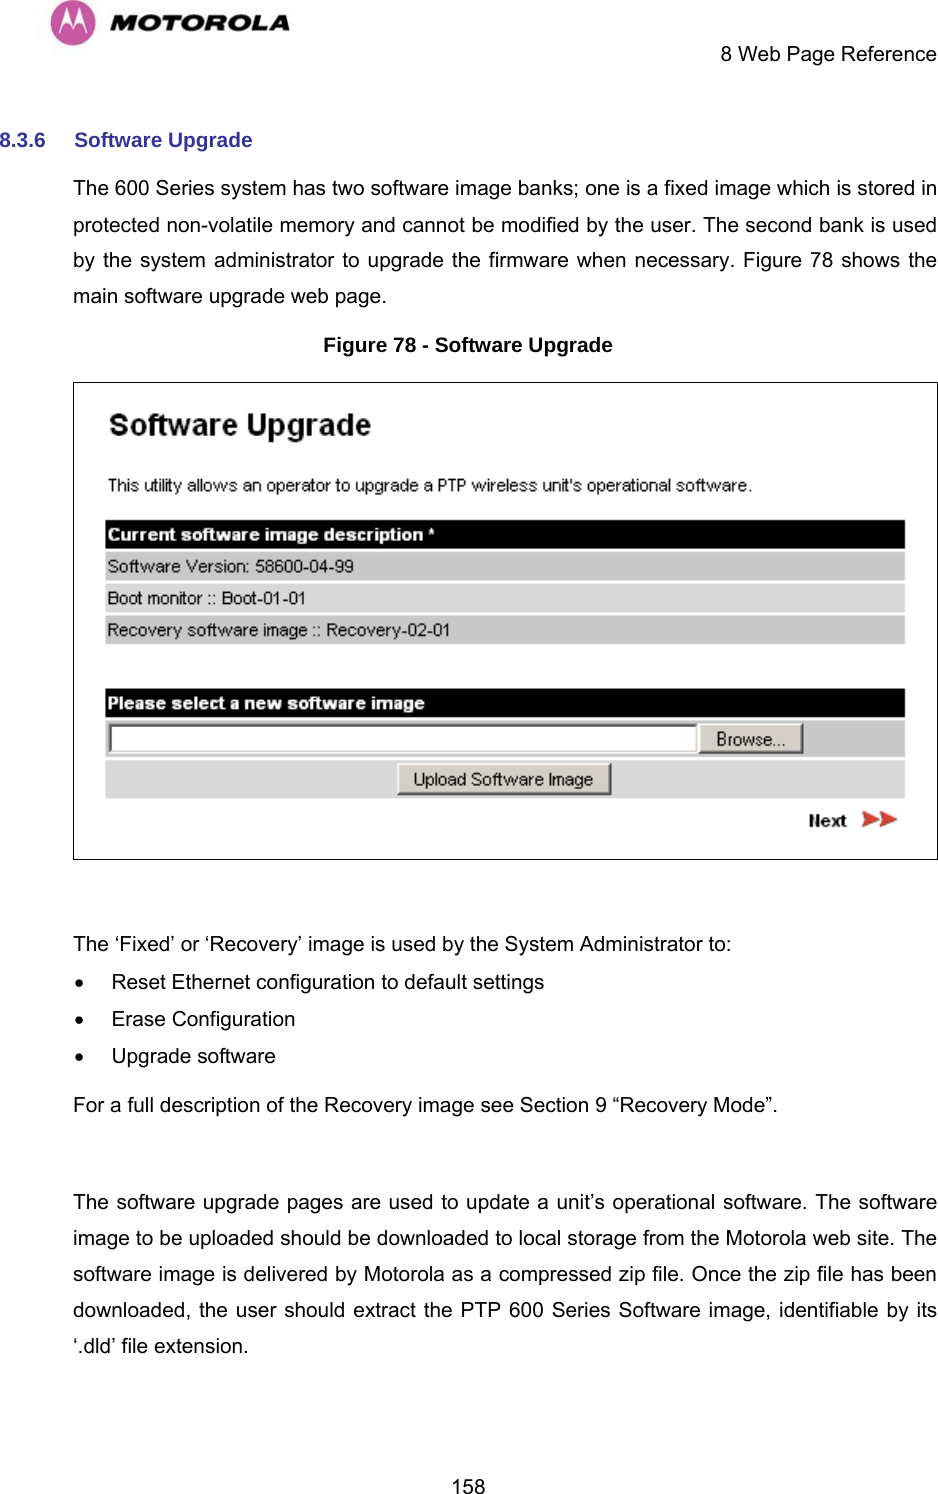     8 Web Page Reference  1588.3.6  Software Upgrade The 600 Series system has two software image banks; one is a fixed image which is stored in protected non-volatile memory and cannot be modified by the user. The second bank is used by the system administrator to upgrade the firmware when necessary. Figure 78 shows the main software upgrade web page. Figure 78 - Software Upgrade   The ‘Fixed’ or ‘Recovery’ image is used by the System Administrator to: •  Reset Ethernet configuration to default settings • Erase Configuration • Upgrade software For a full description of the Recovery image see Section 9 “Recovery Mode”.  The software upgrade pages are used to update a unit’s operational software. The software image to be uploaded should be downloaded to local storage from the Motorola web site. The software image is delivered by Motorola as a compressed zip file. Once the zip file has been downloaded, the user should extract the PTP 600 Series Software image, identifiable by its ‘.dld’ file extension. 